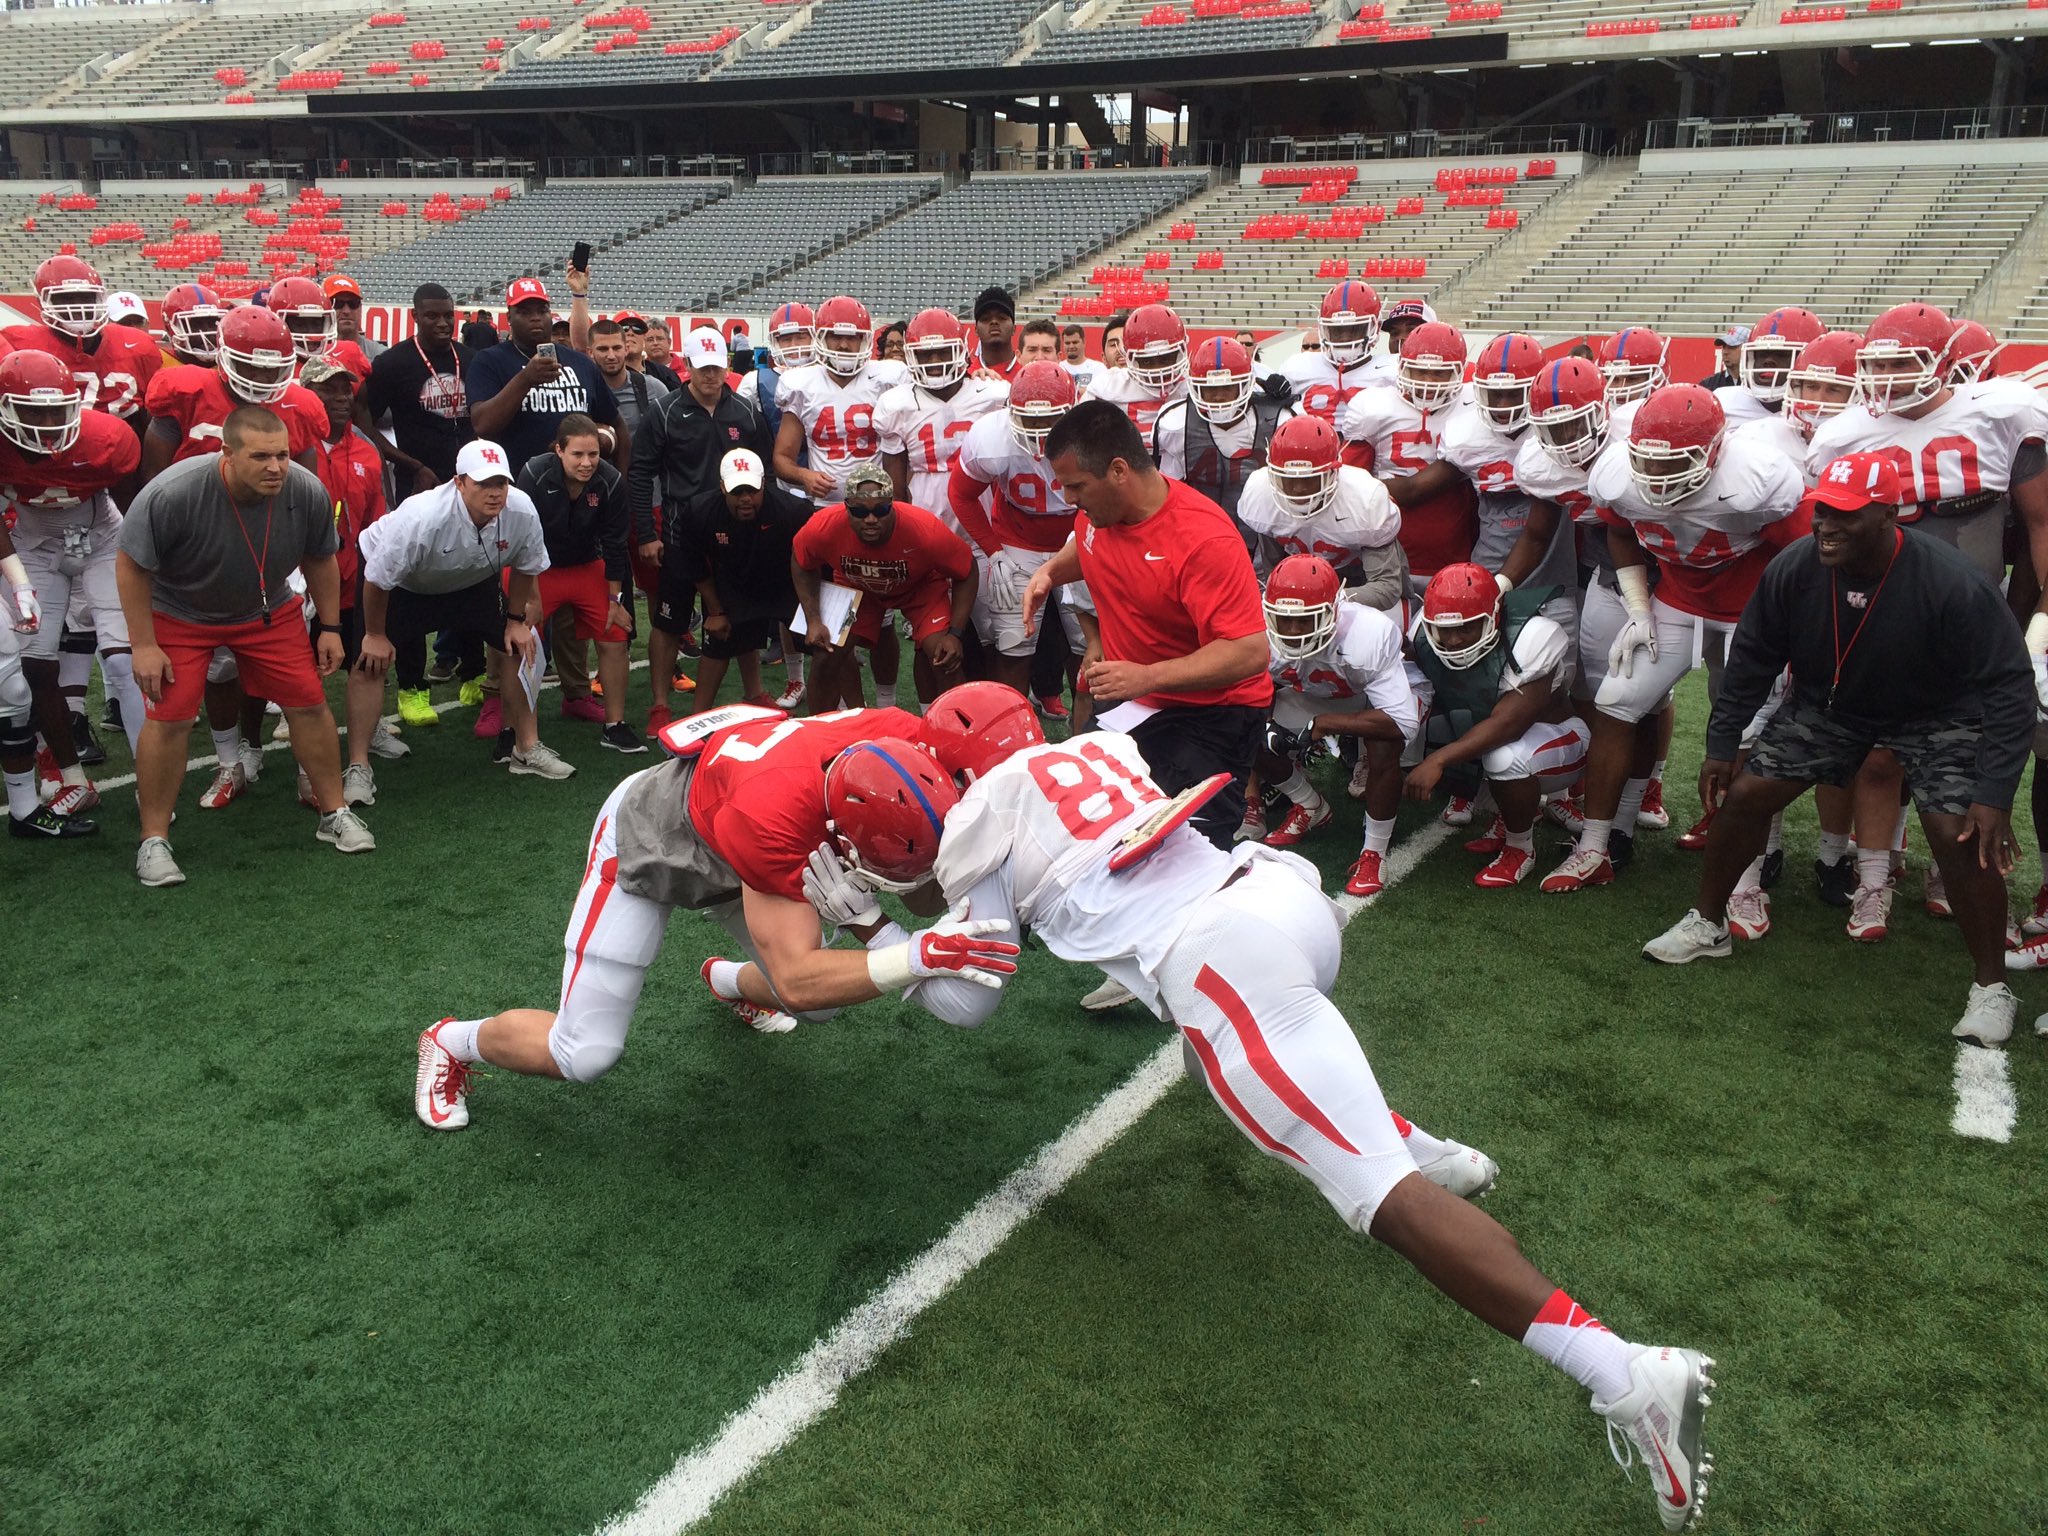 #HTownTakeover on Twitter: "Circle drill in full effect. First spring scrimmage about to start ...